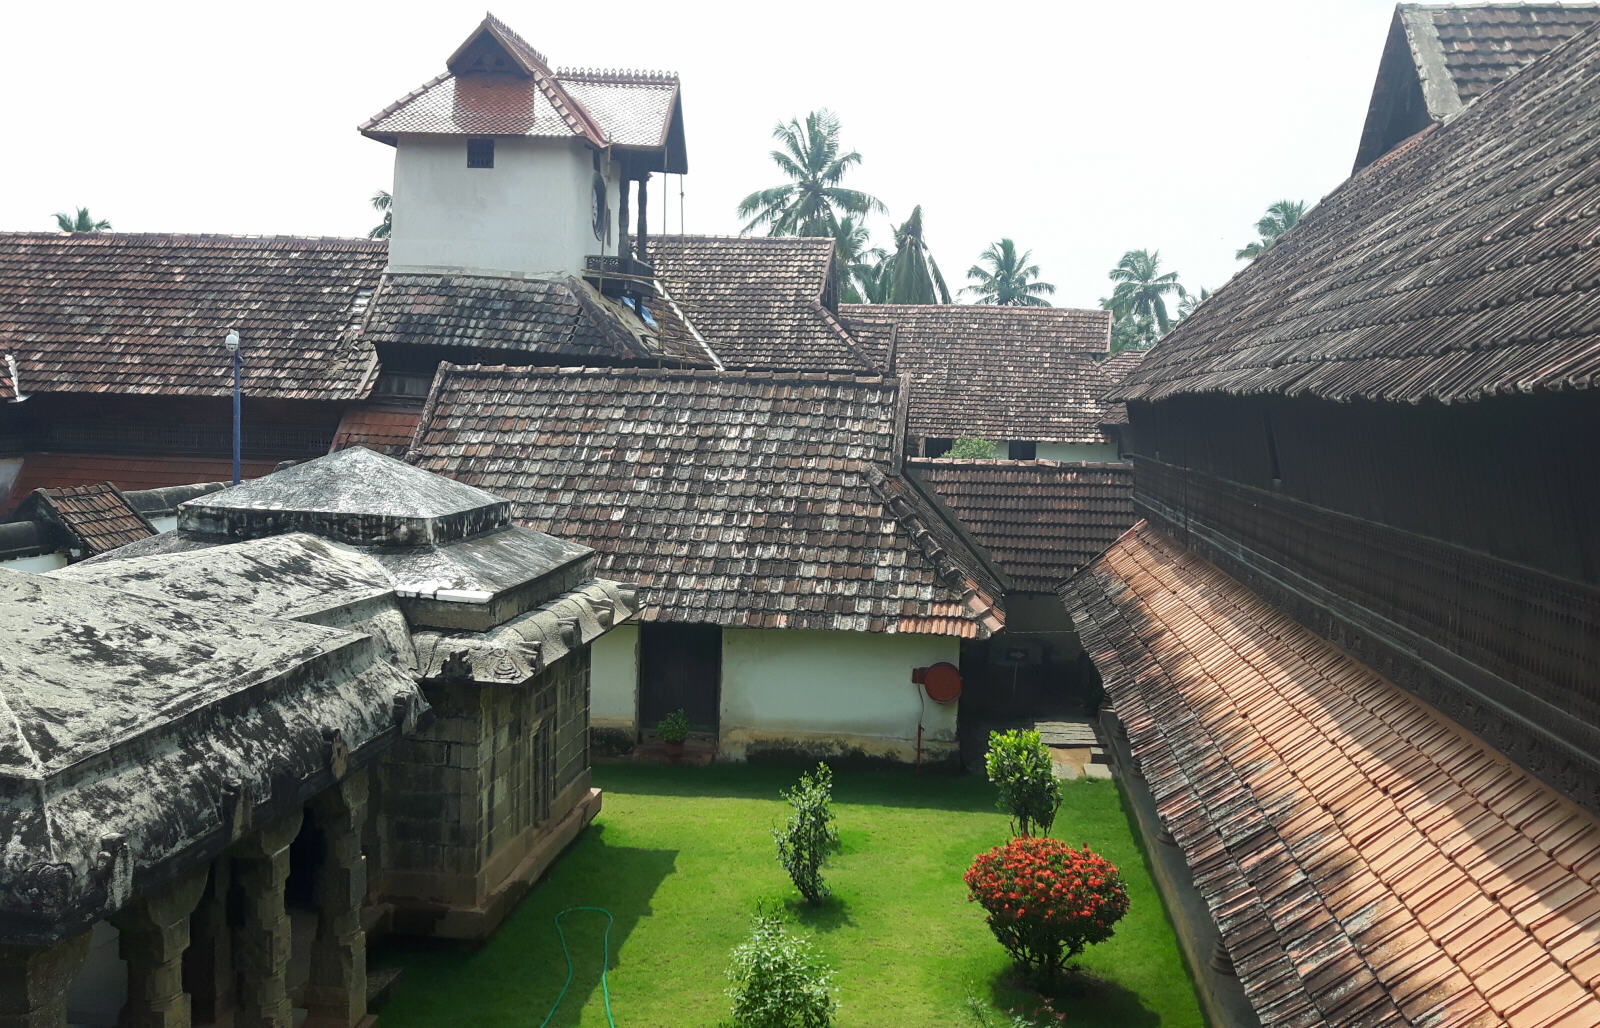 The palace of the Rajahs of Travancore, Tamil Nadu, India